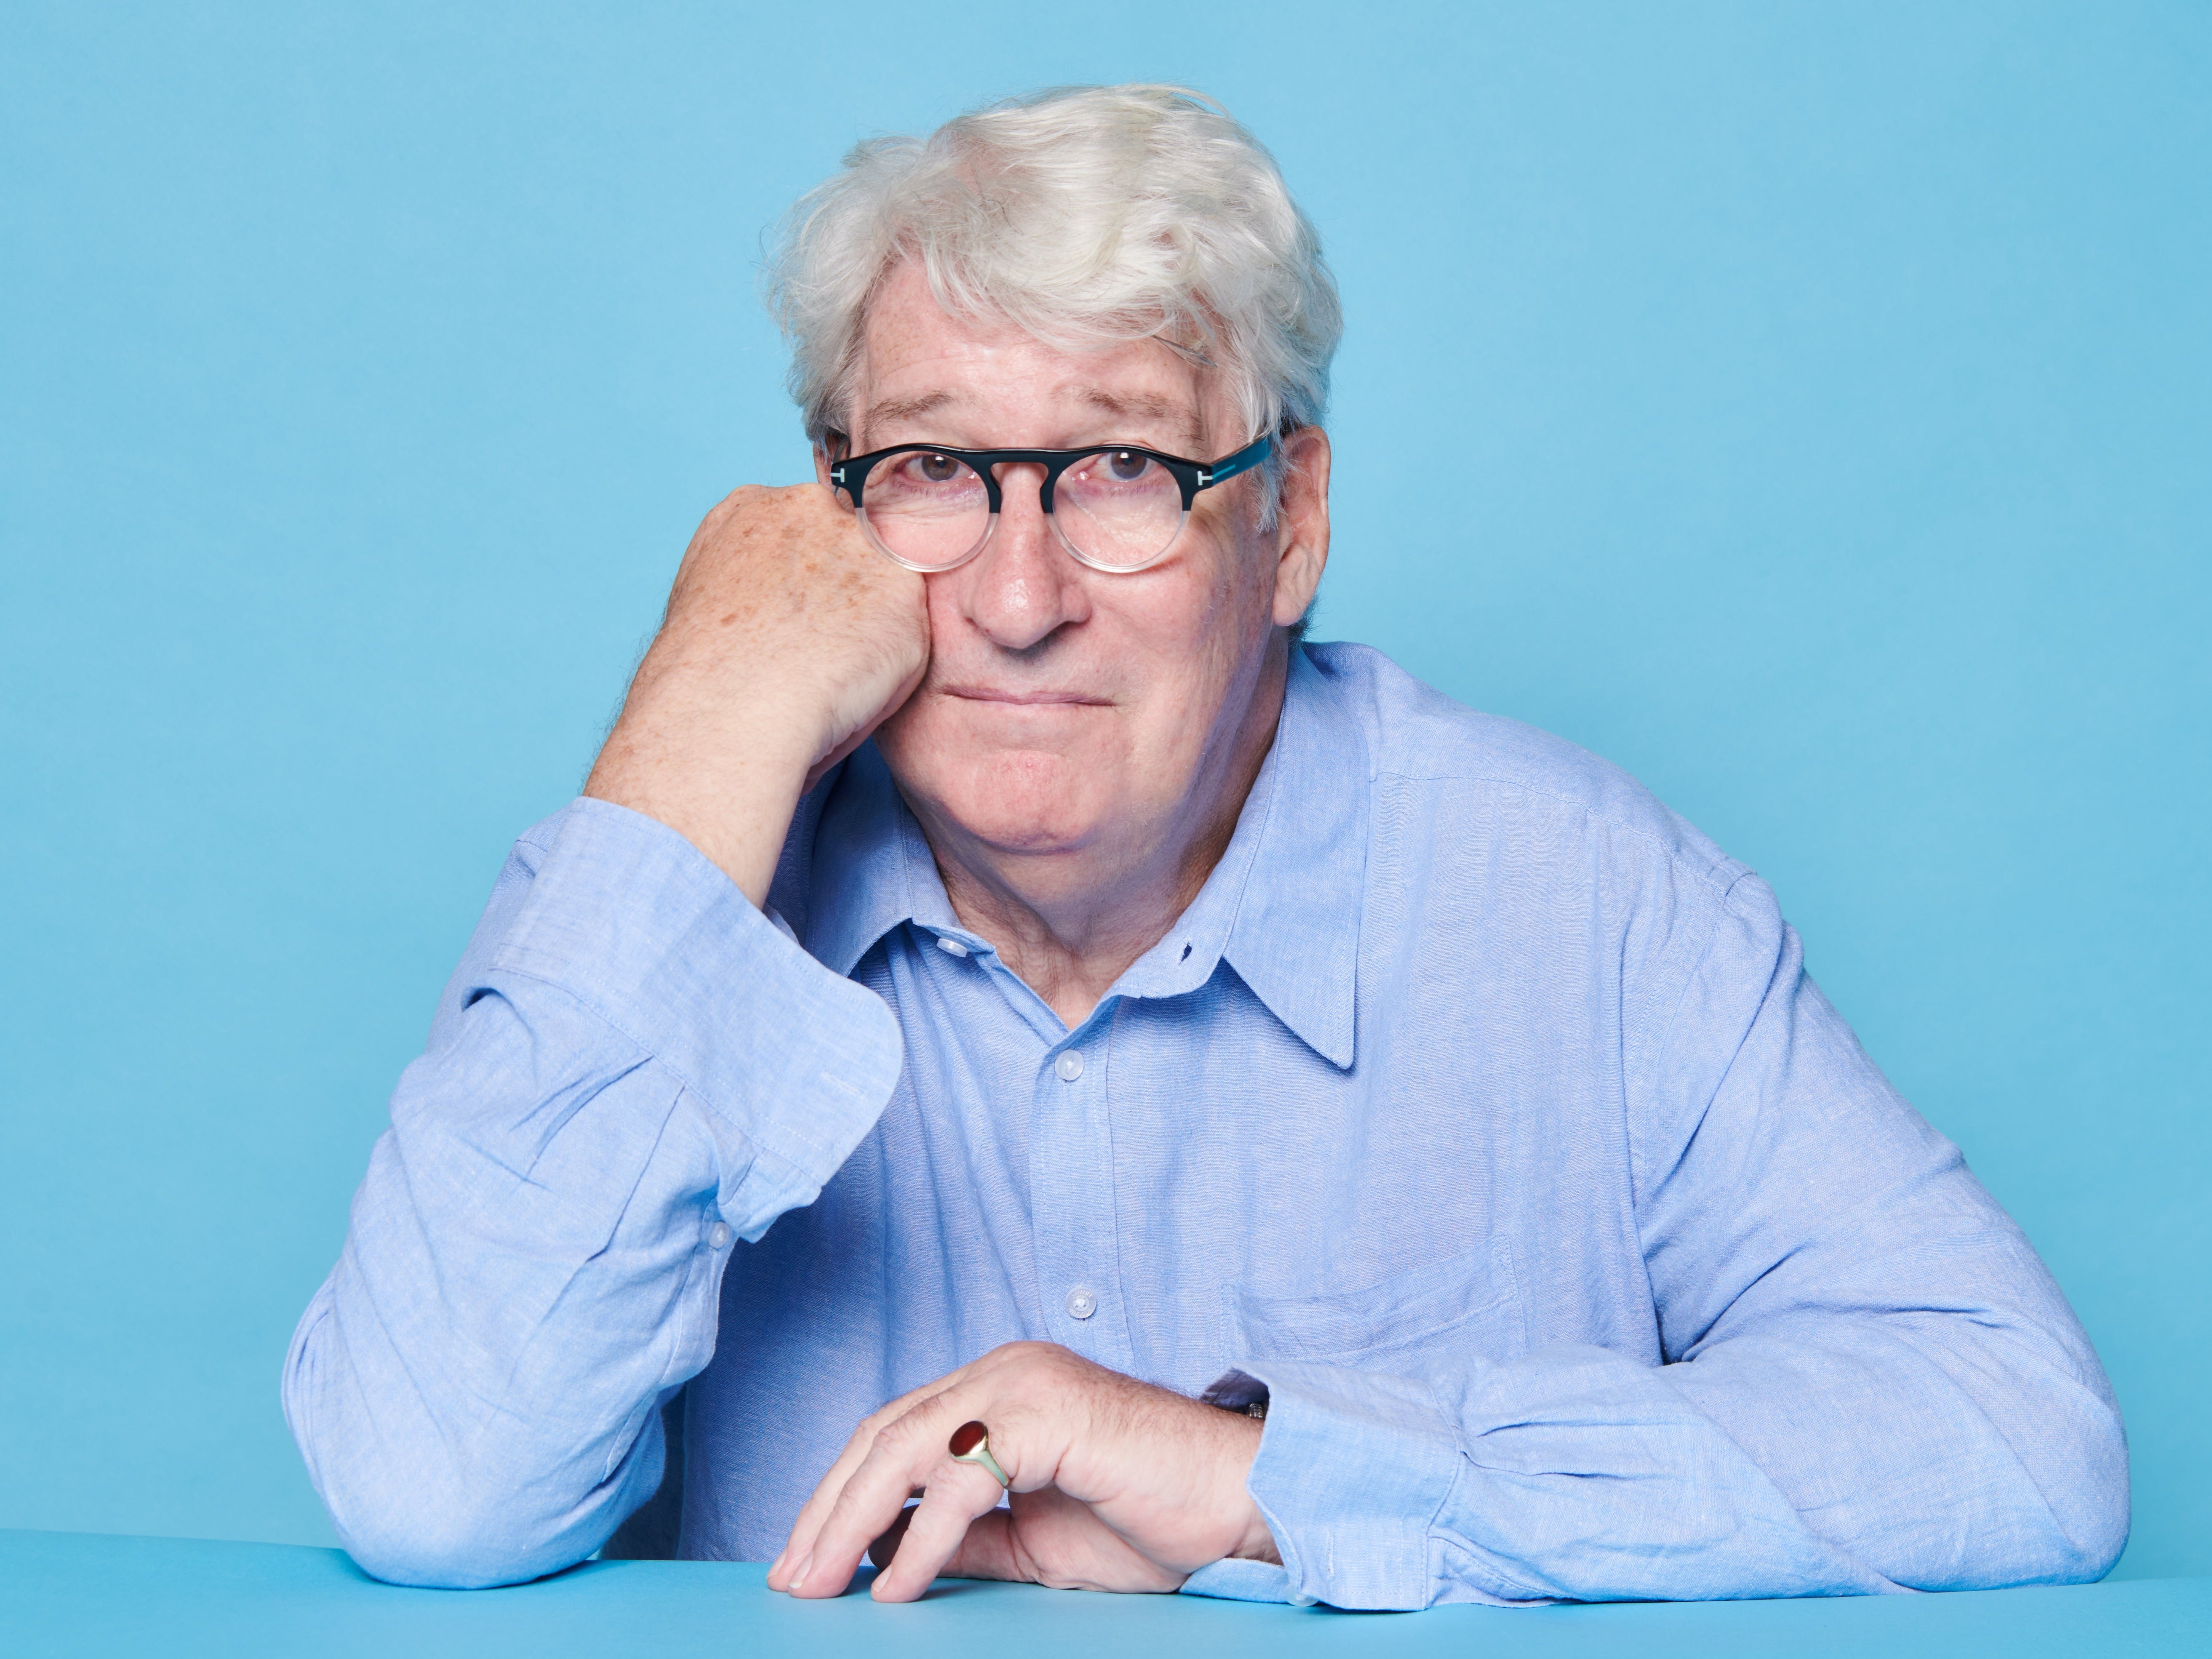 Paxman candidly talked about his struggles coming to terms with having the disease, saying he feels ‘beaten and dejected’ by Parkinson’s, but he doesn’t want to feel pitied